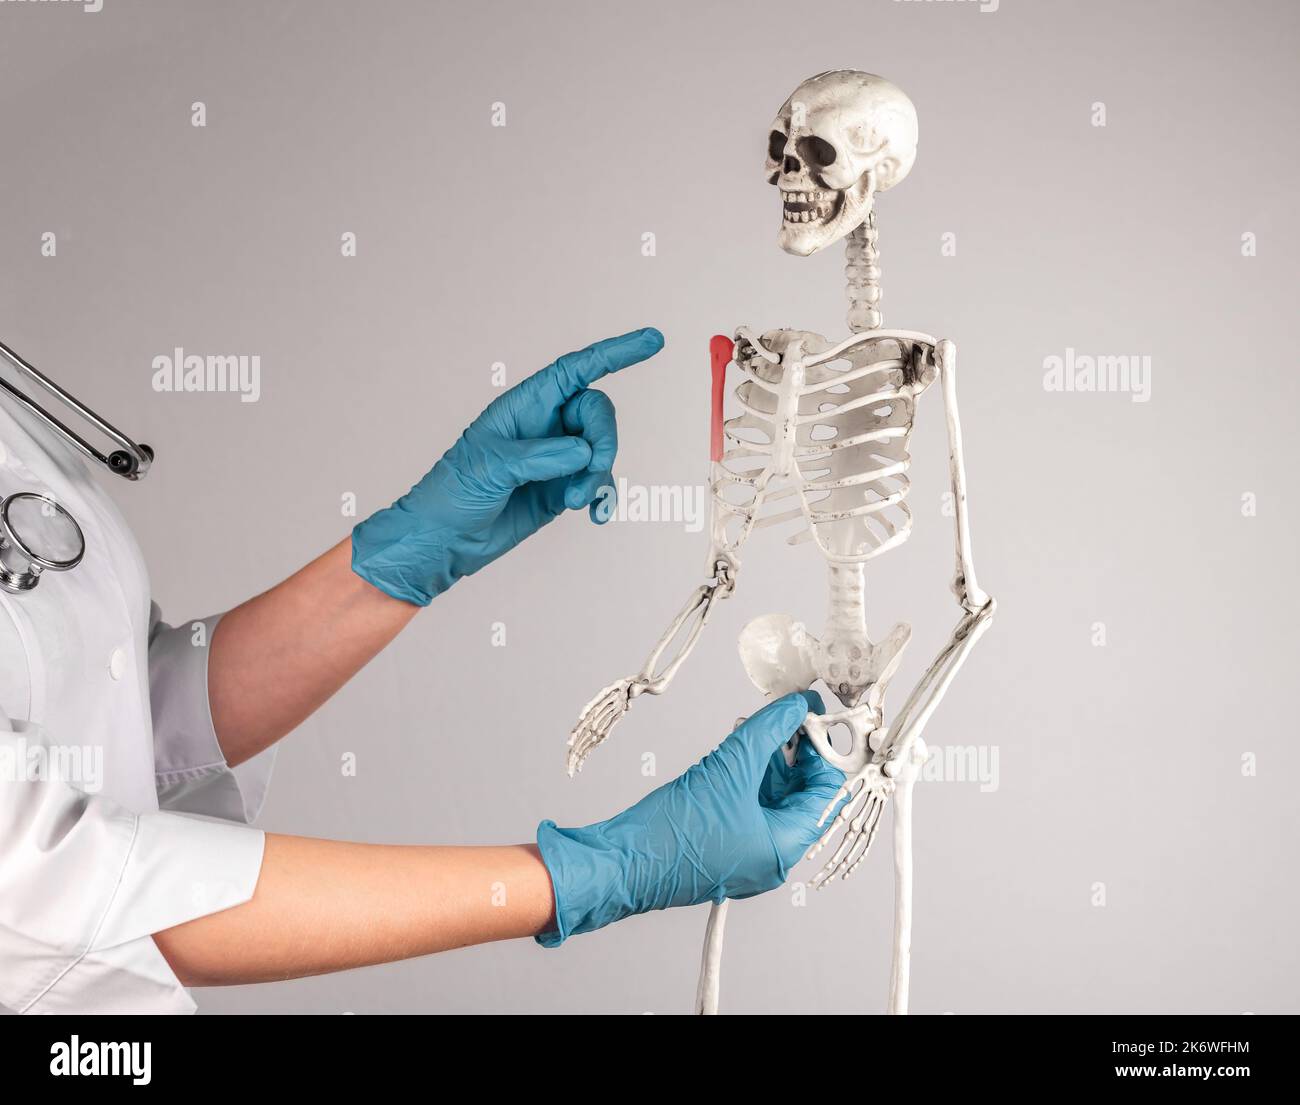 Shoulder bone pain, fracture, injury shown on skeleton. High quality photo Stock Photo